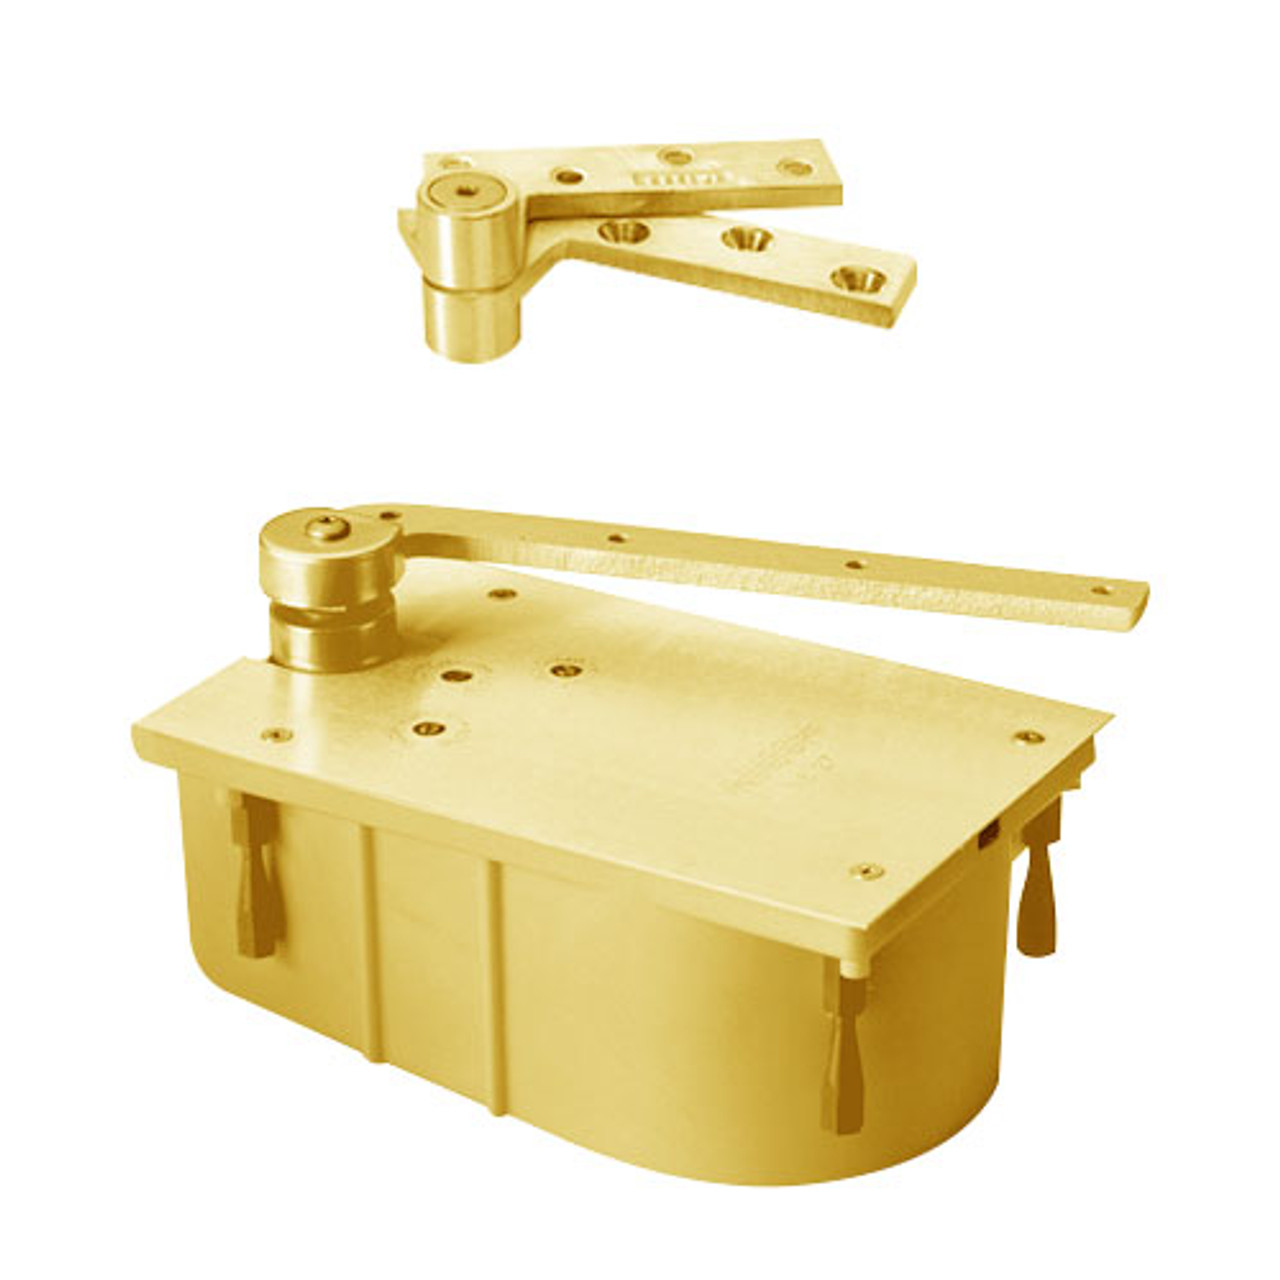 SC127-90N-LH-605 Rixson 127 Series Heavy Duty 3/4" Offset Hung Floor Closer in Bright Brass Finish